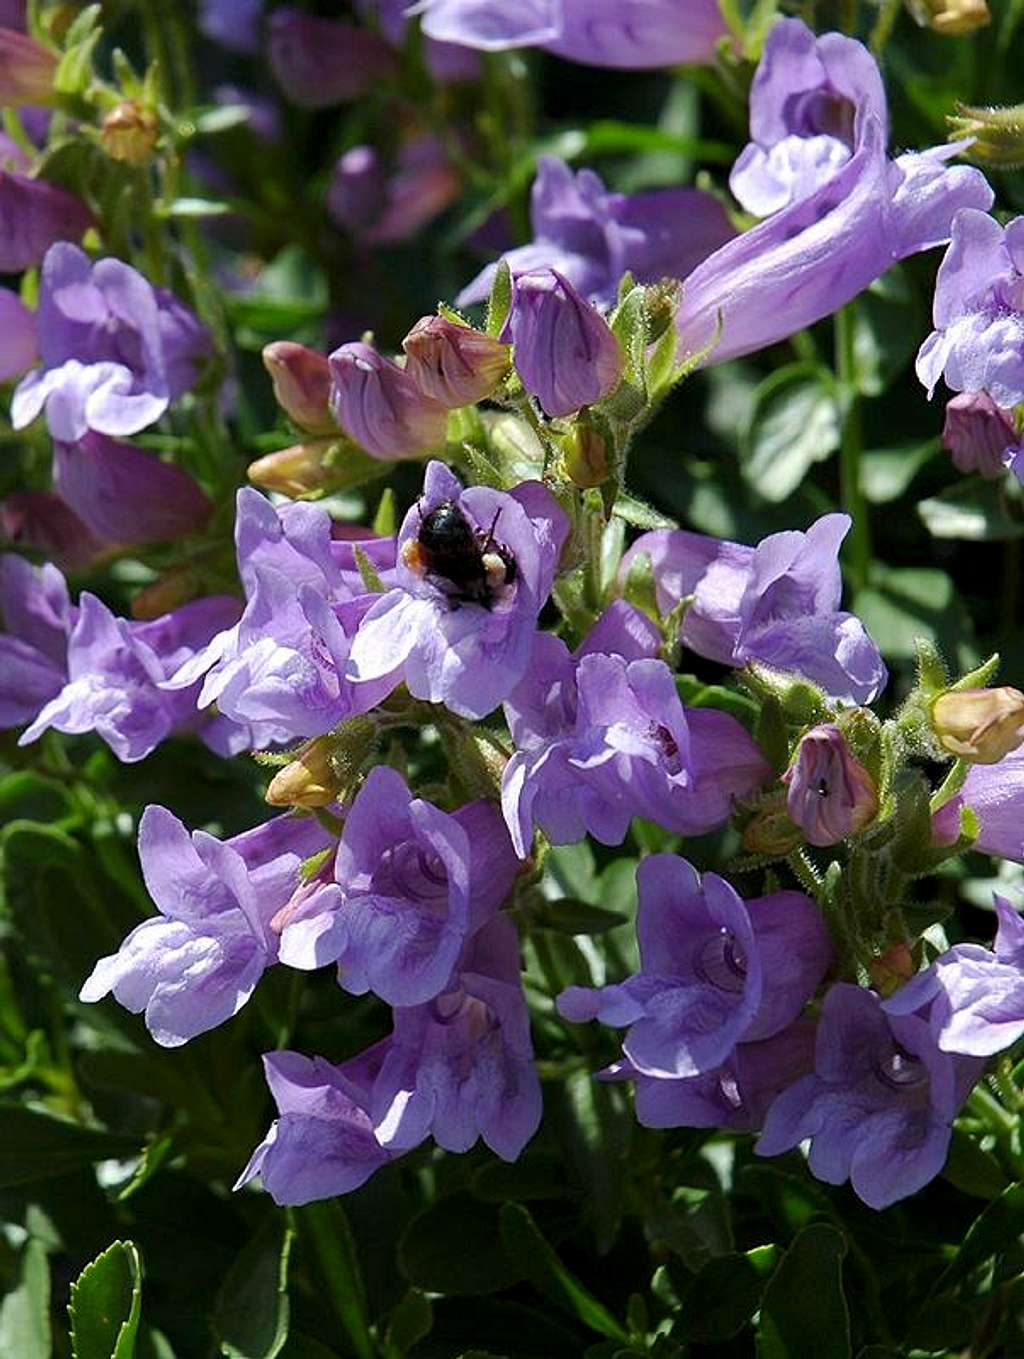 Bee collecting nectar in Penstemon